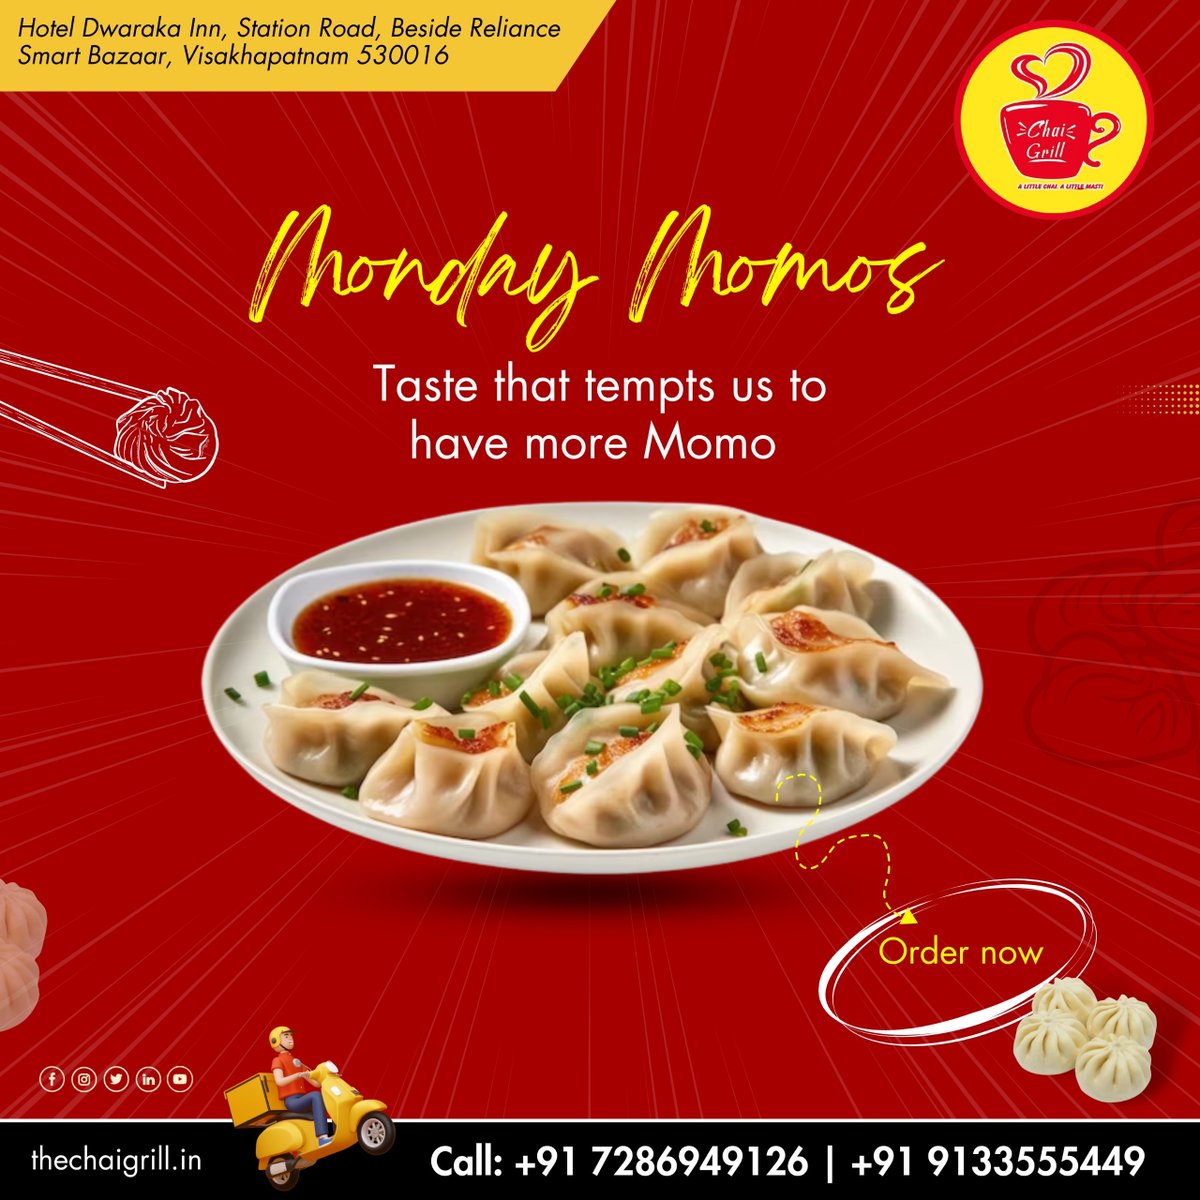 🥟 Monday Momos at The Chai Grill 🥟

Taste that tempts us to have more momo!

🛒 Order now at thechaigrill.in

📞 Call: +91 7286949126 | +91 9133555449

📍 Hotel Dwaraka Inn, Station Road, Beside Reliance Smart Bazaar, Visakhapatnam 530016

#MondayMomos #MomoLove #Foodie